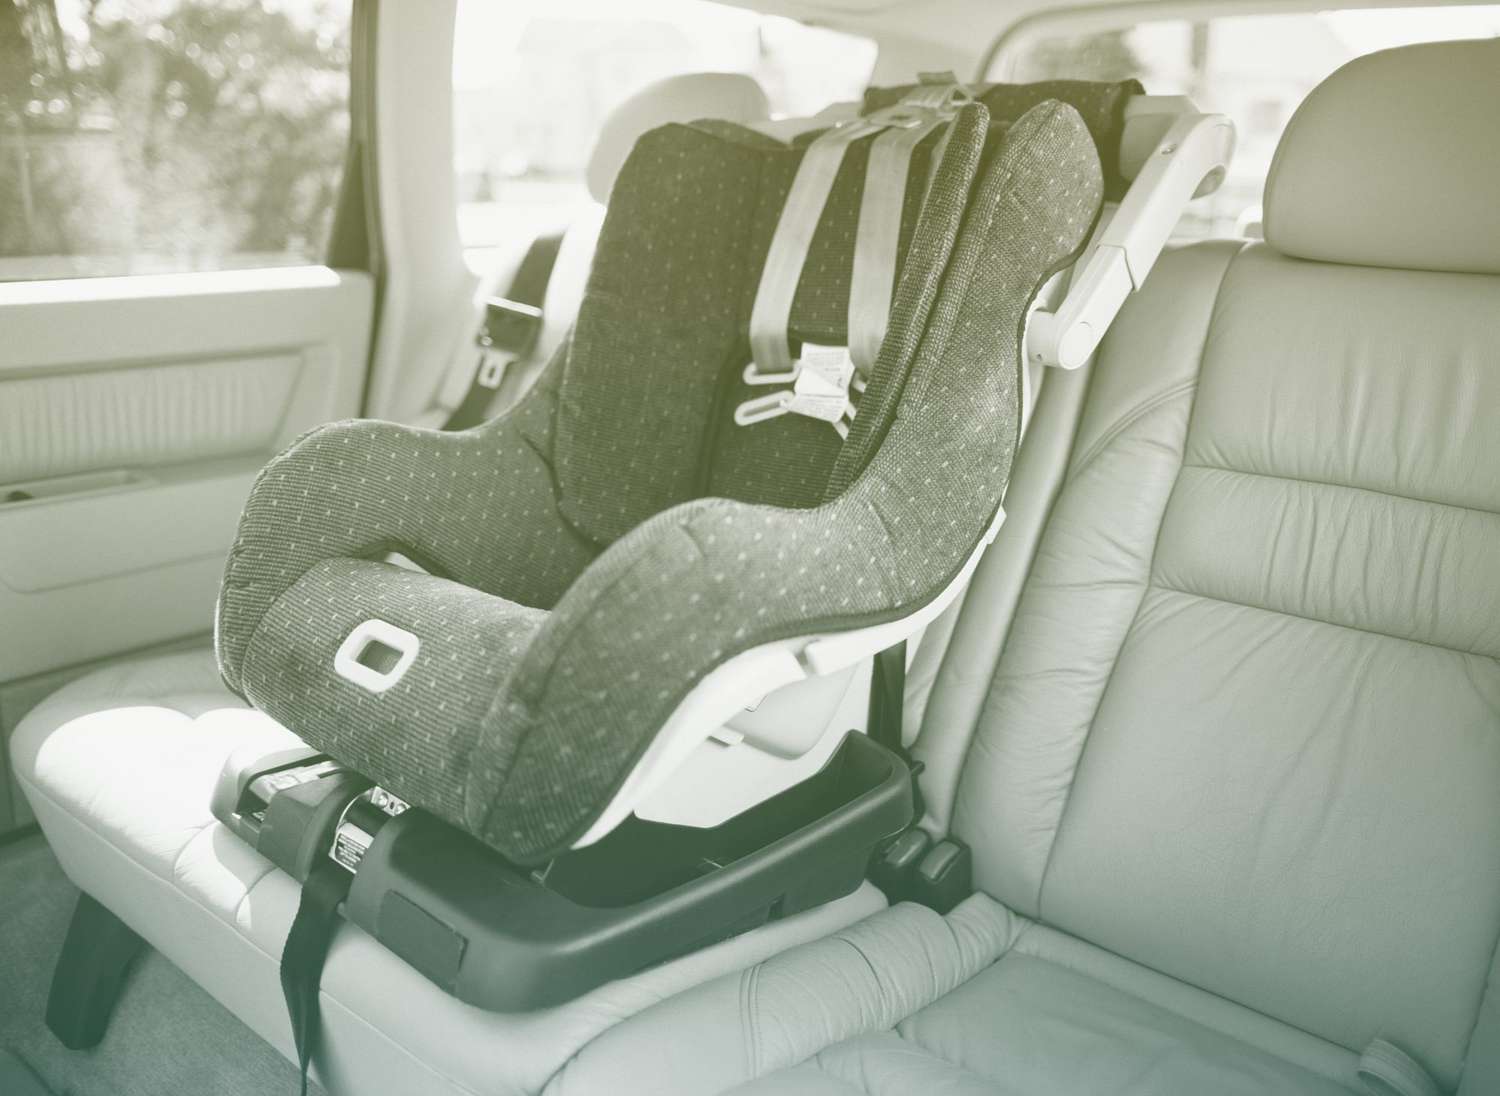 The Best Ways To Clean Car Seats Pas - How To Clean Seat Cover Of Car